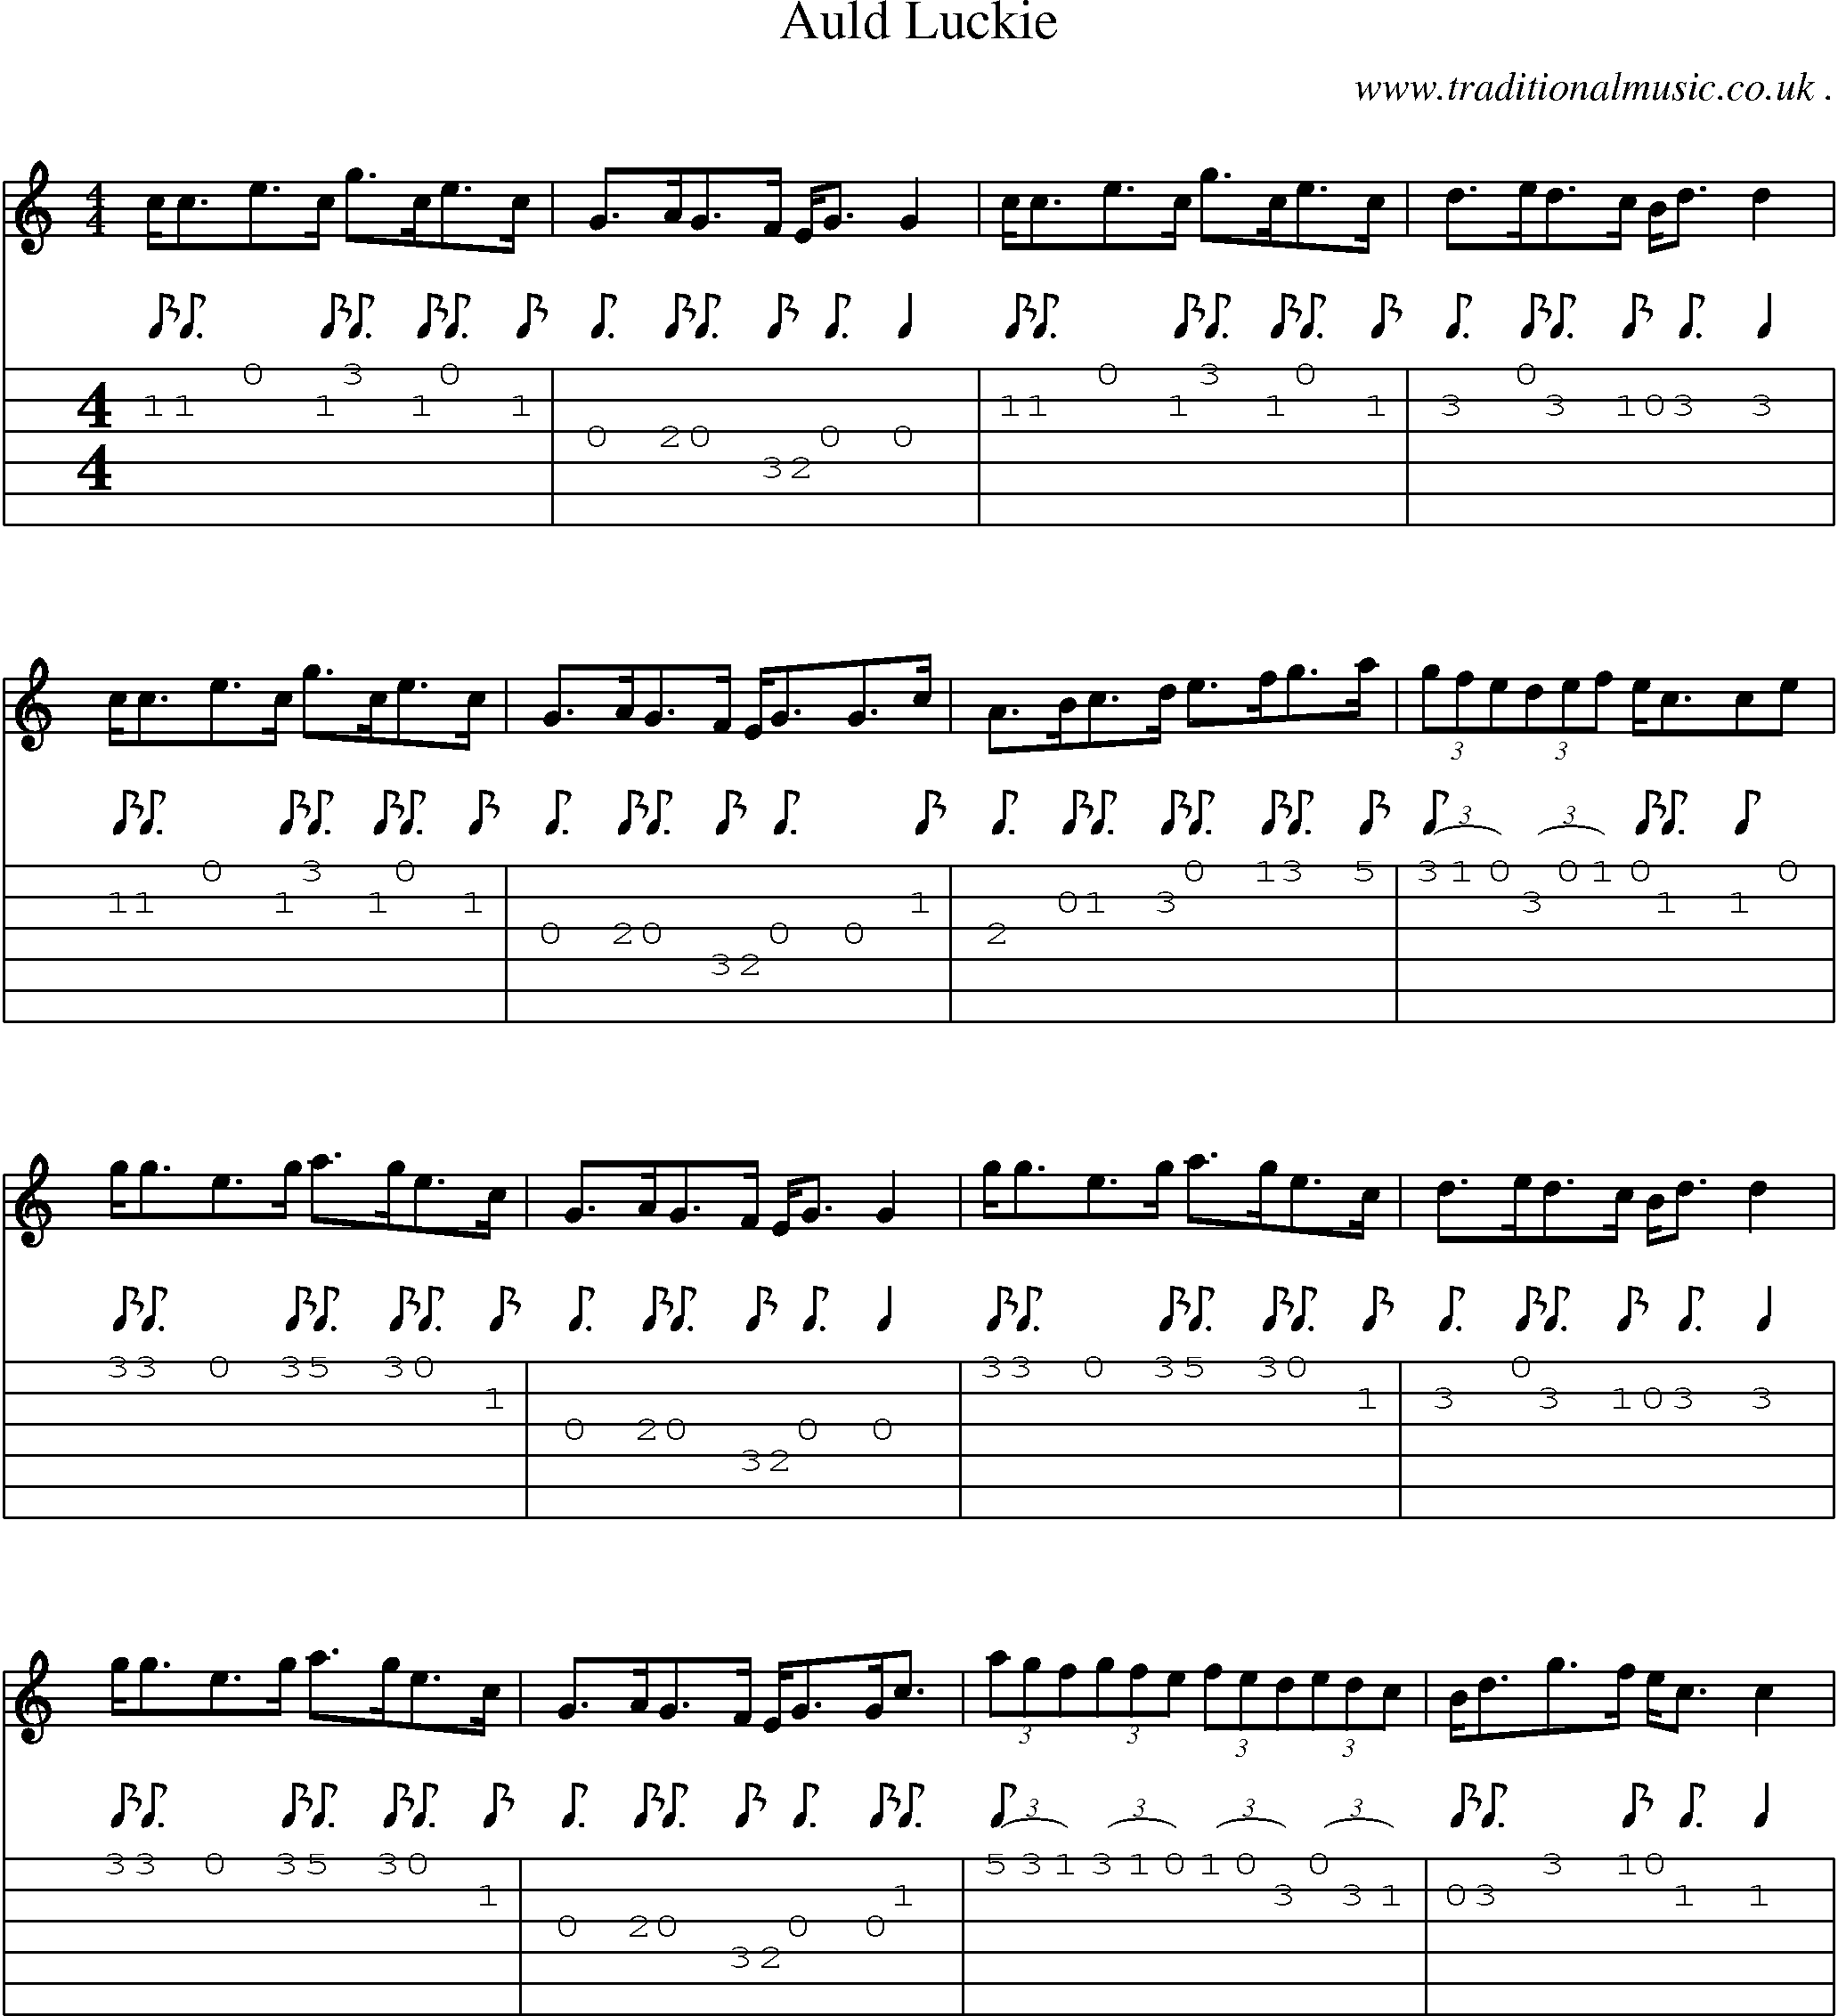 Sheet-music  score, Chords and Guitar Tabs for Auld Luckie